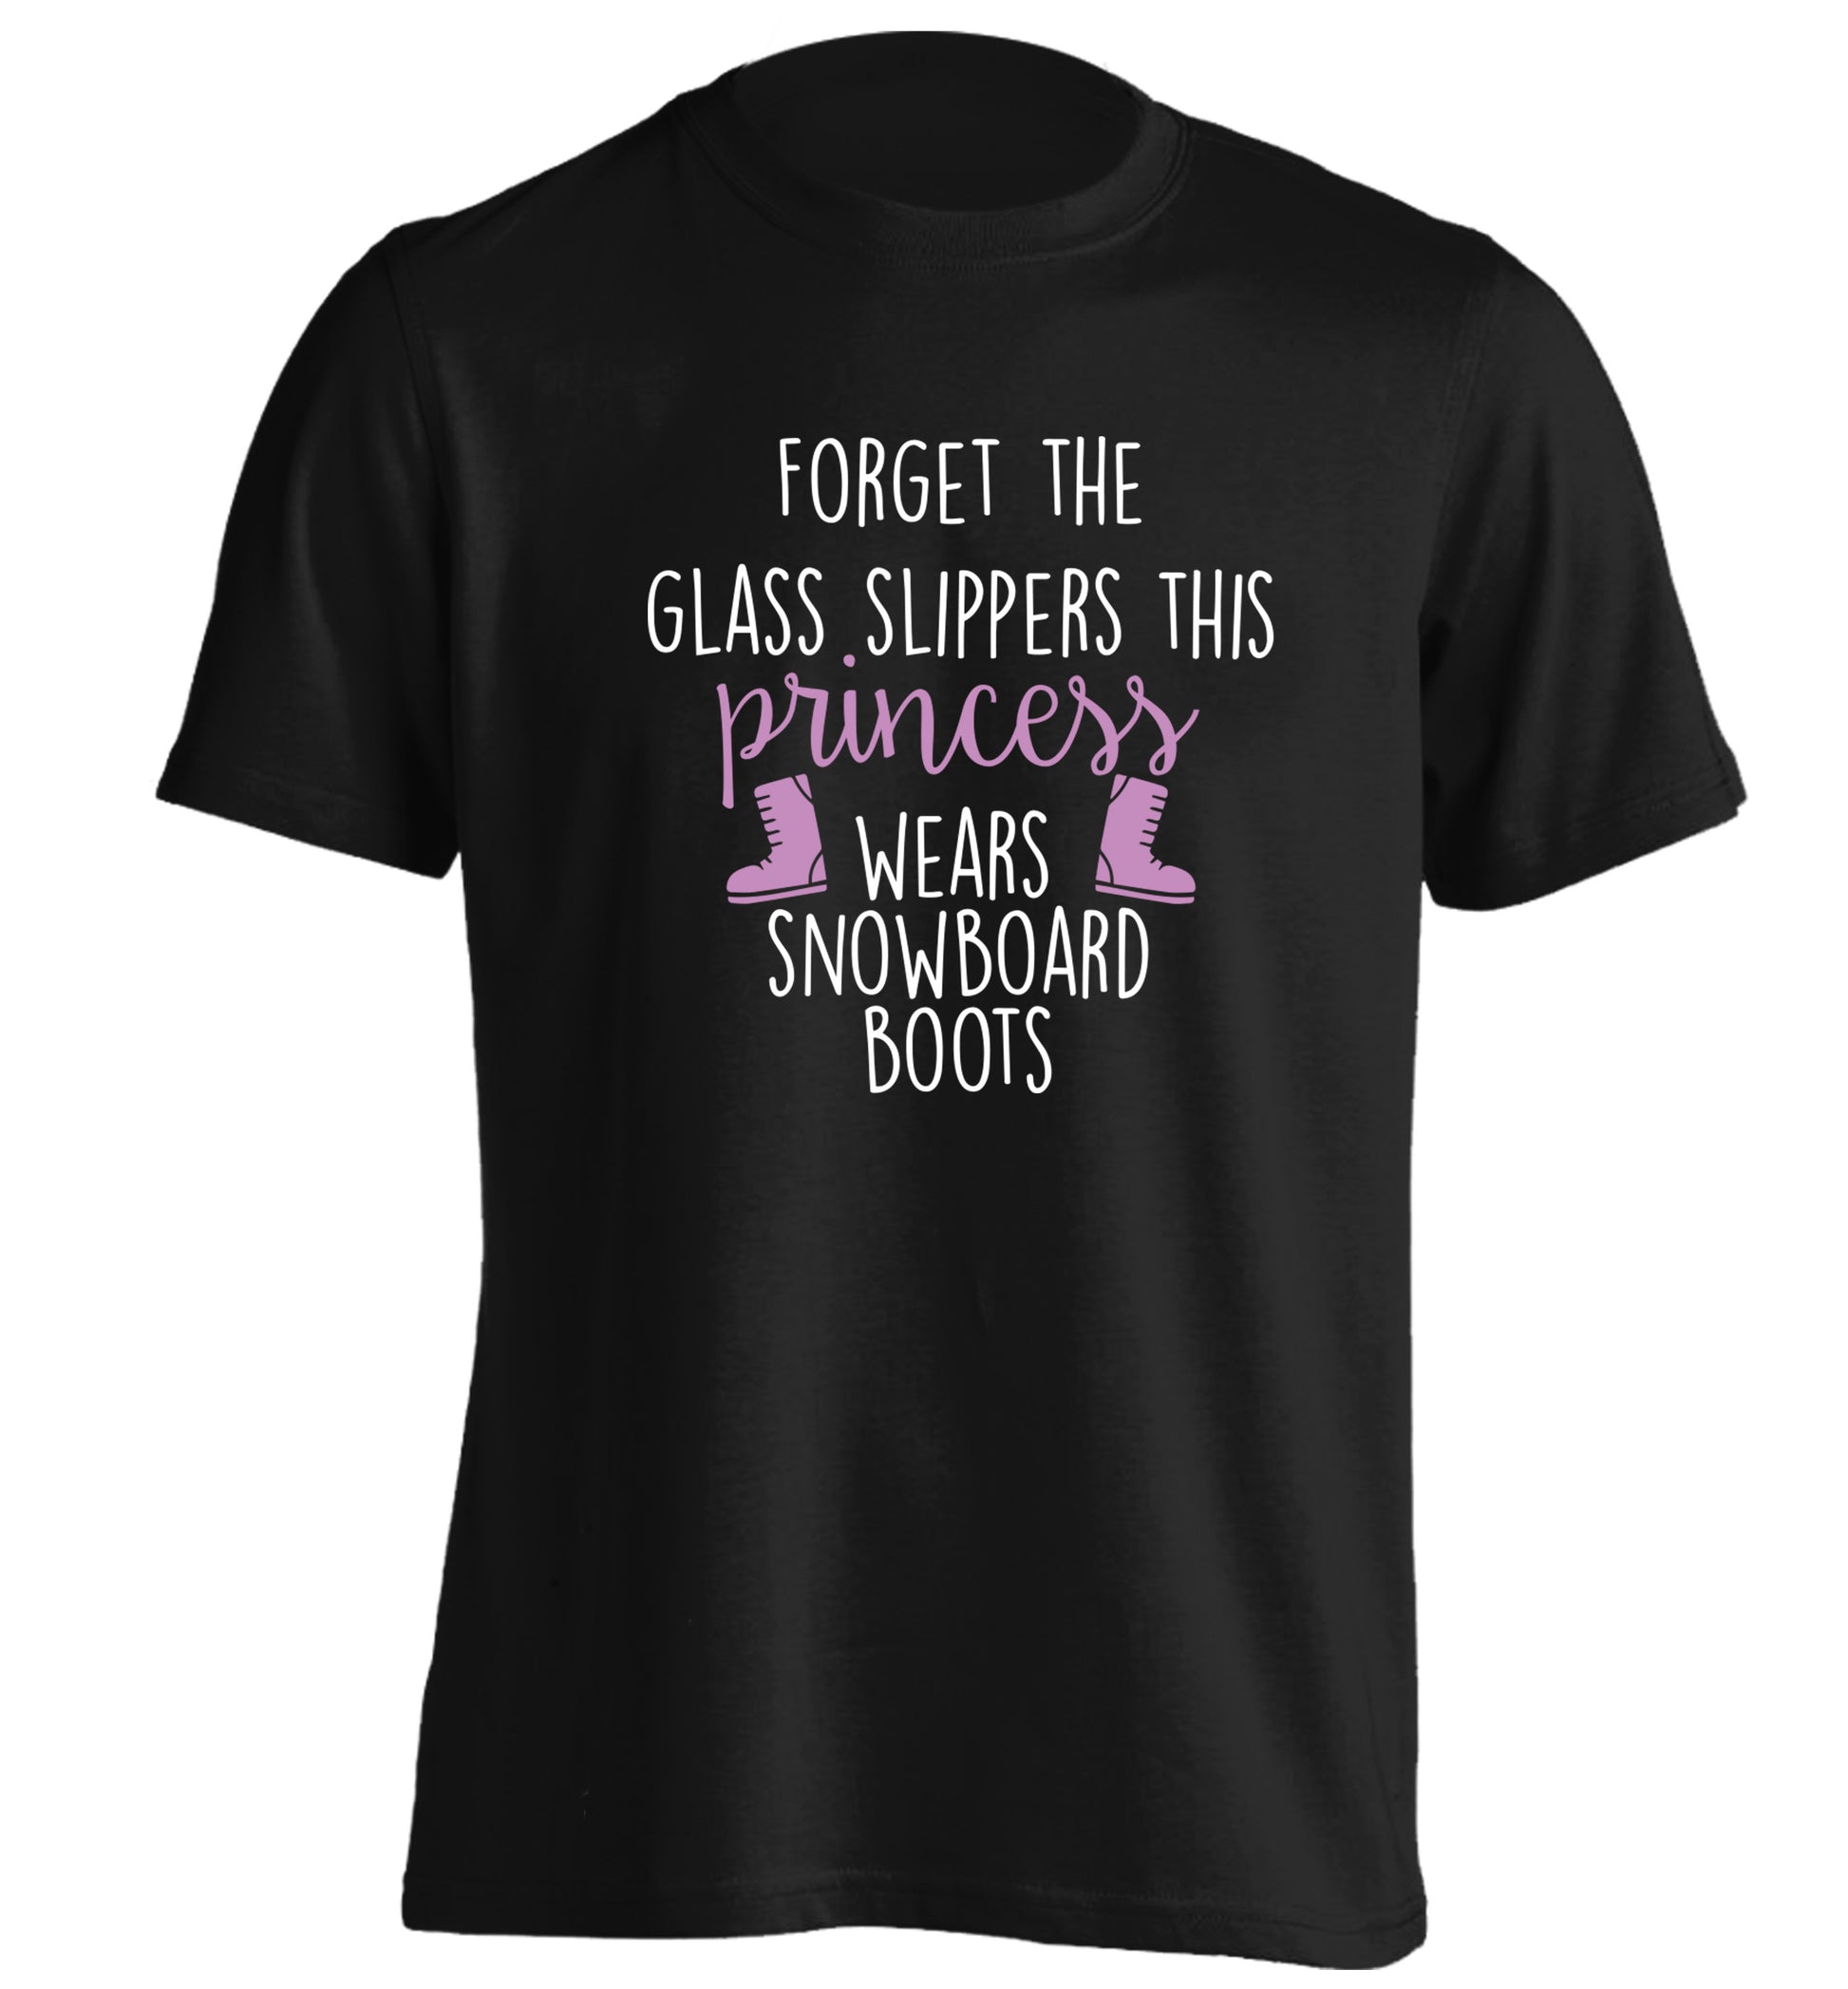 Forget the glass slippers this princess wears snowboard boots adults unisex black Tshirt 2XL